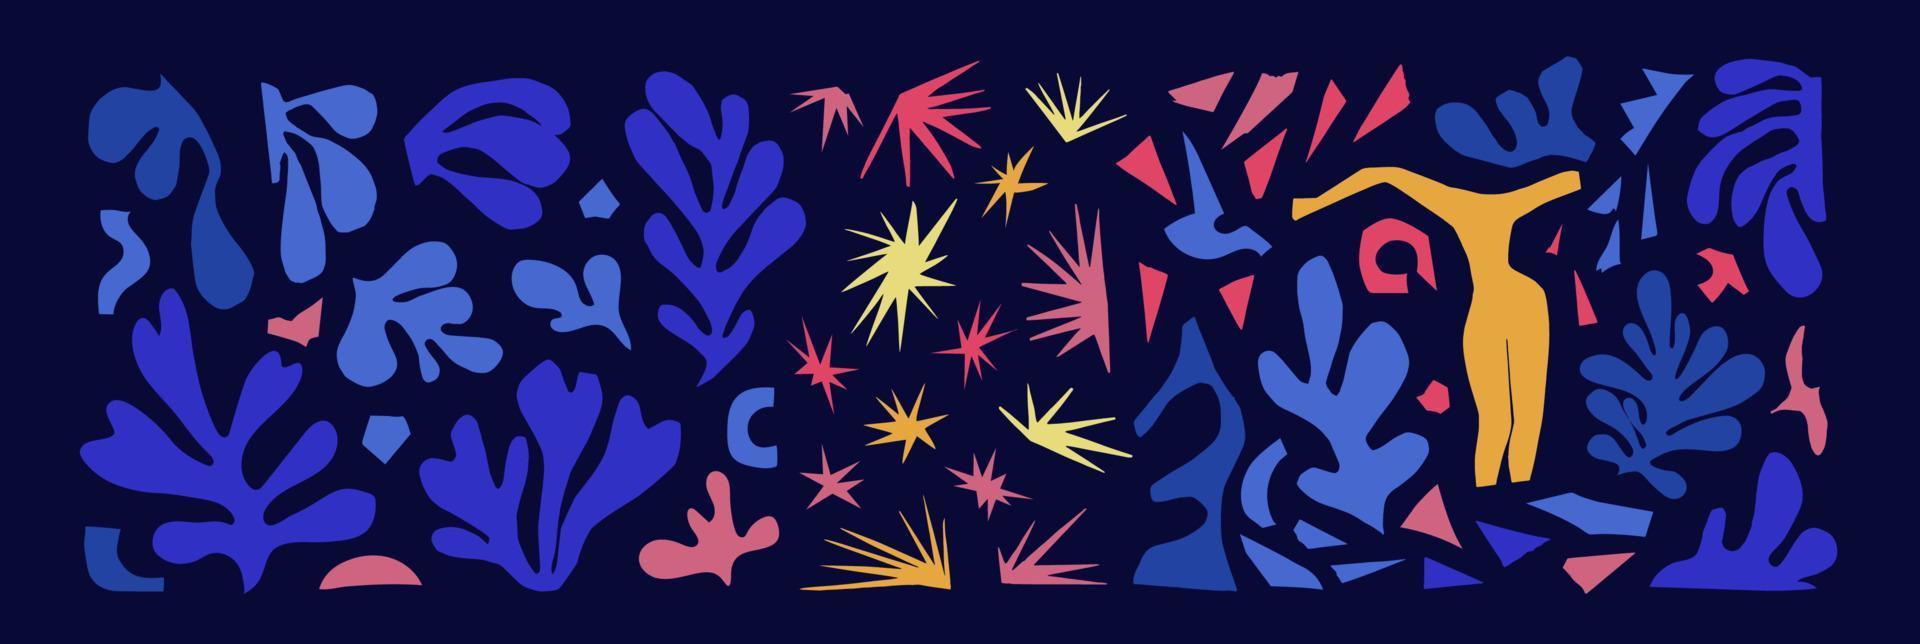 A set of abstract plants and different shapes inspired by Matisse. Vector colored paper cutouts isolated on blue background. Female figure, stars, algae scraps of cut paper.